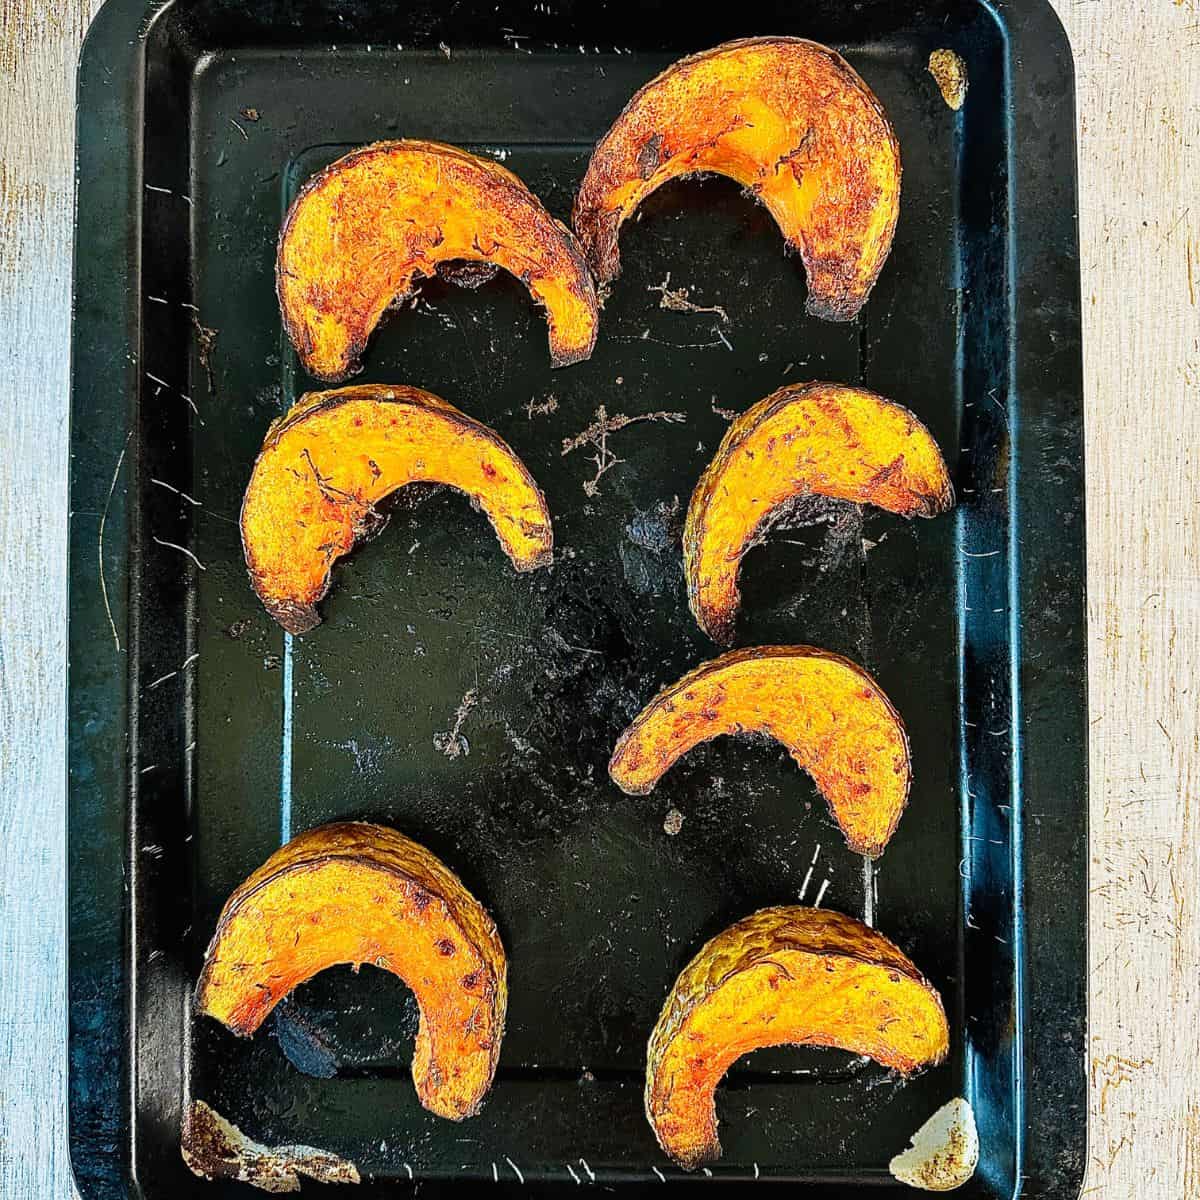 A baking tray/sheet pan with six pumpkin wedges after roasting.